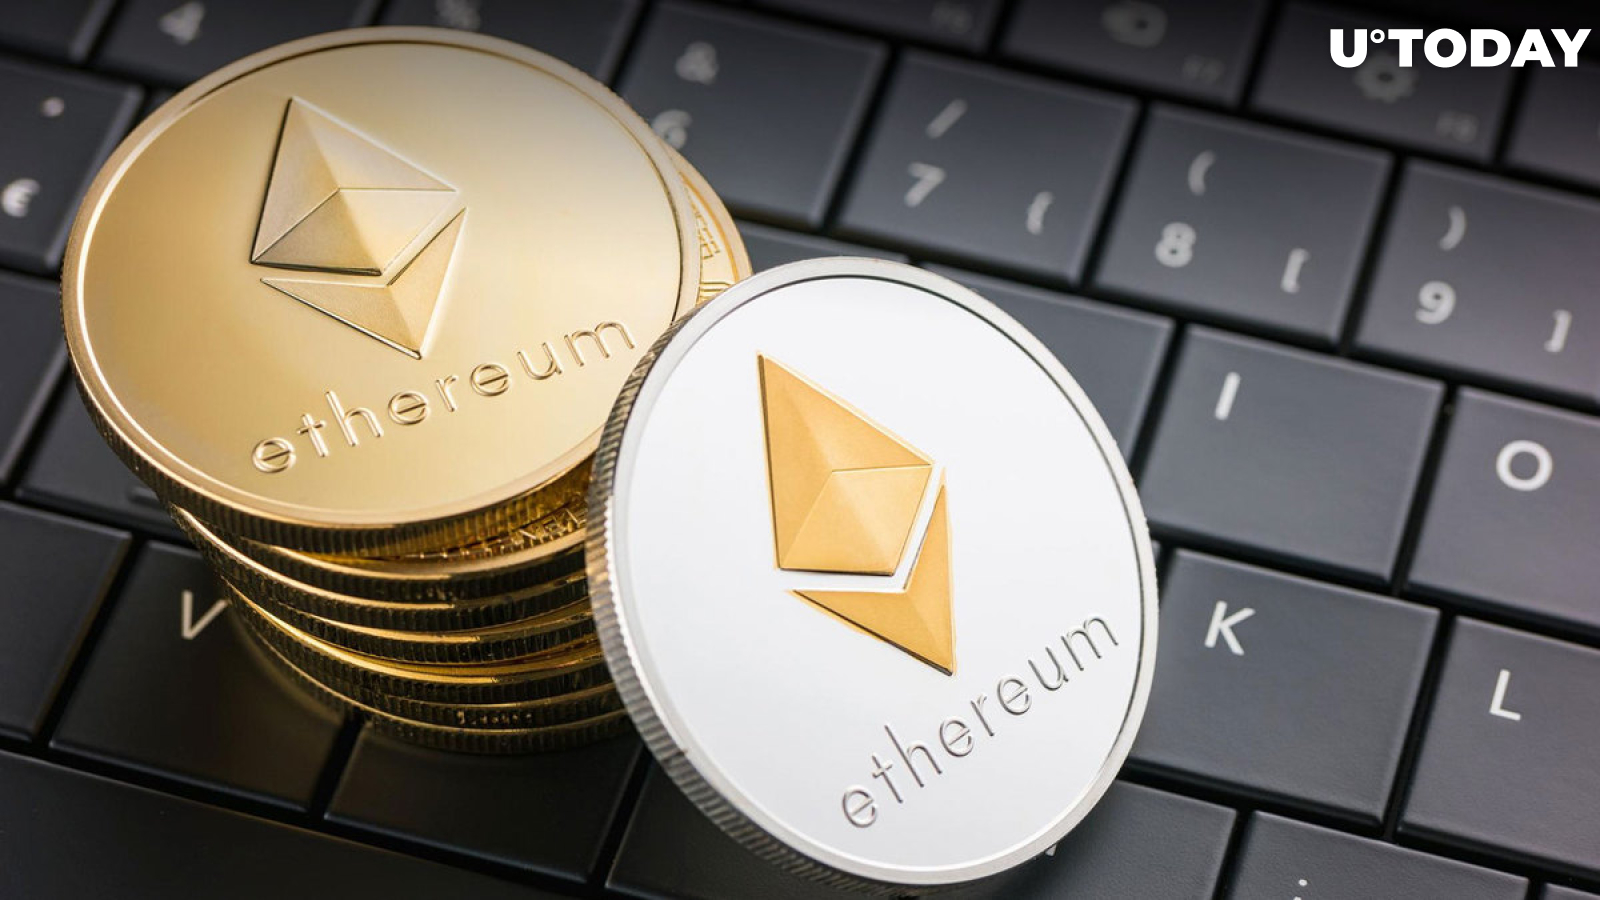 This Ethereum (ETH) Pattern Breakout Might Result in 400% Gains: Details